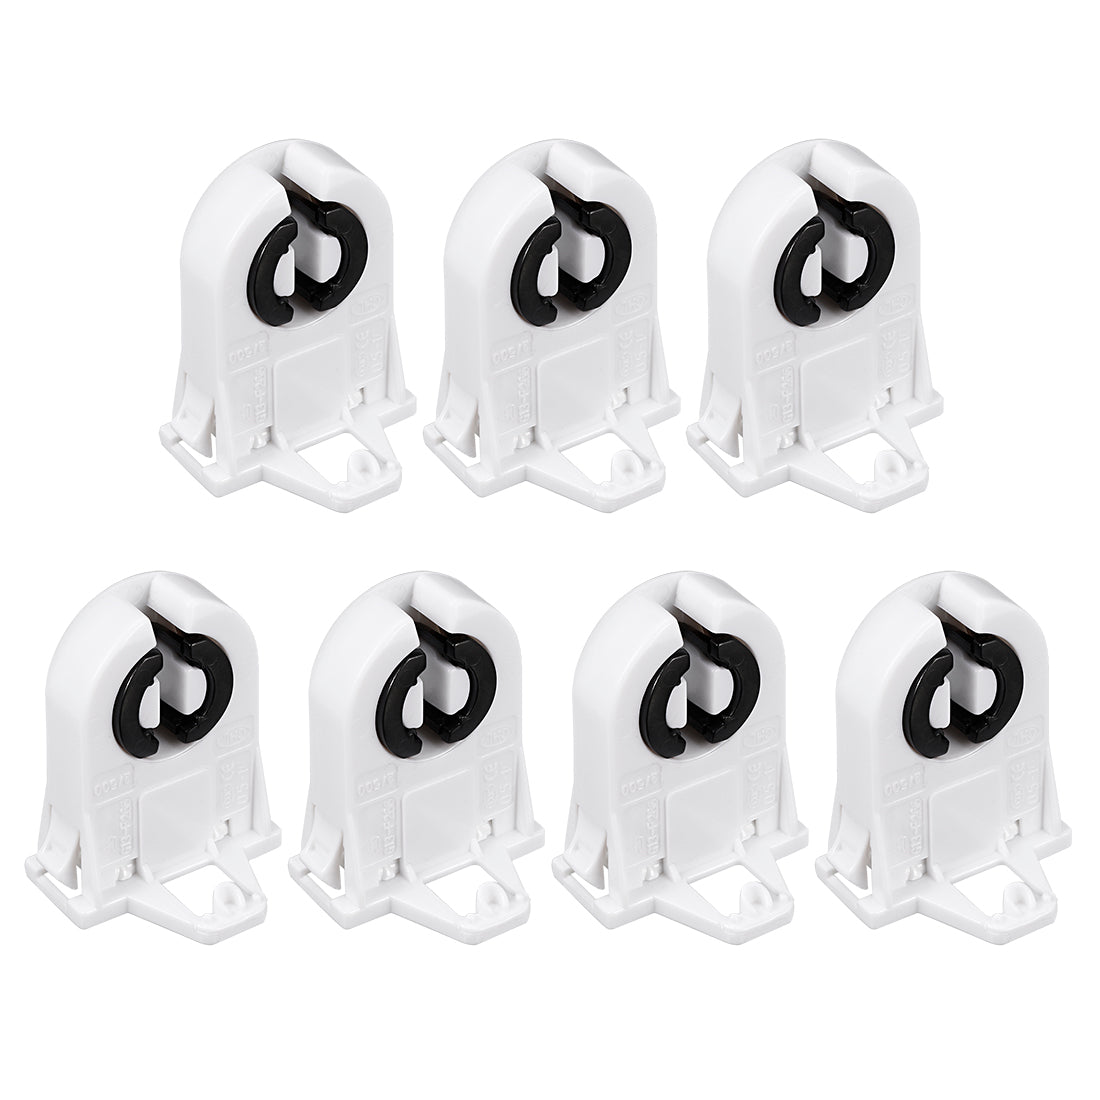 uxcell Uxcell 7 Pcs 2A T8 Socket G13 Base Fluorescent Lamp Holder Light Accessory White